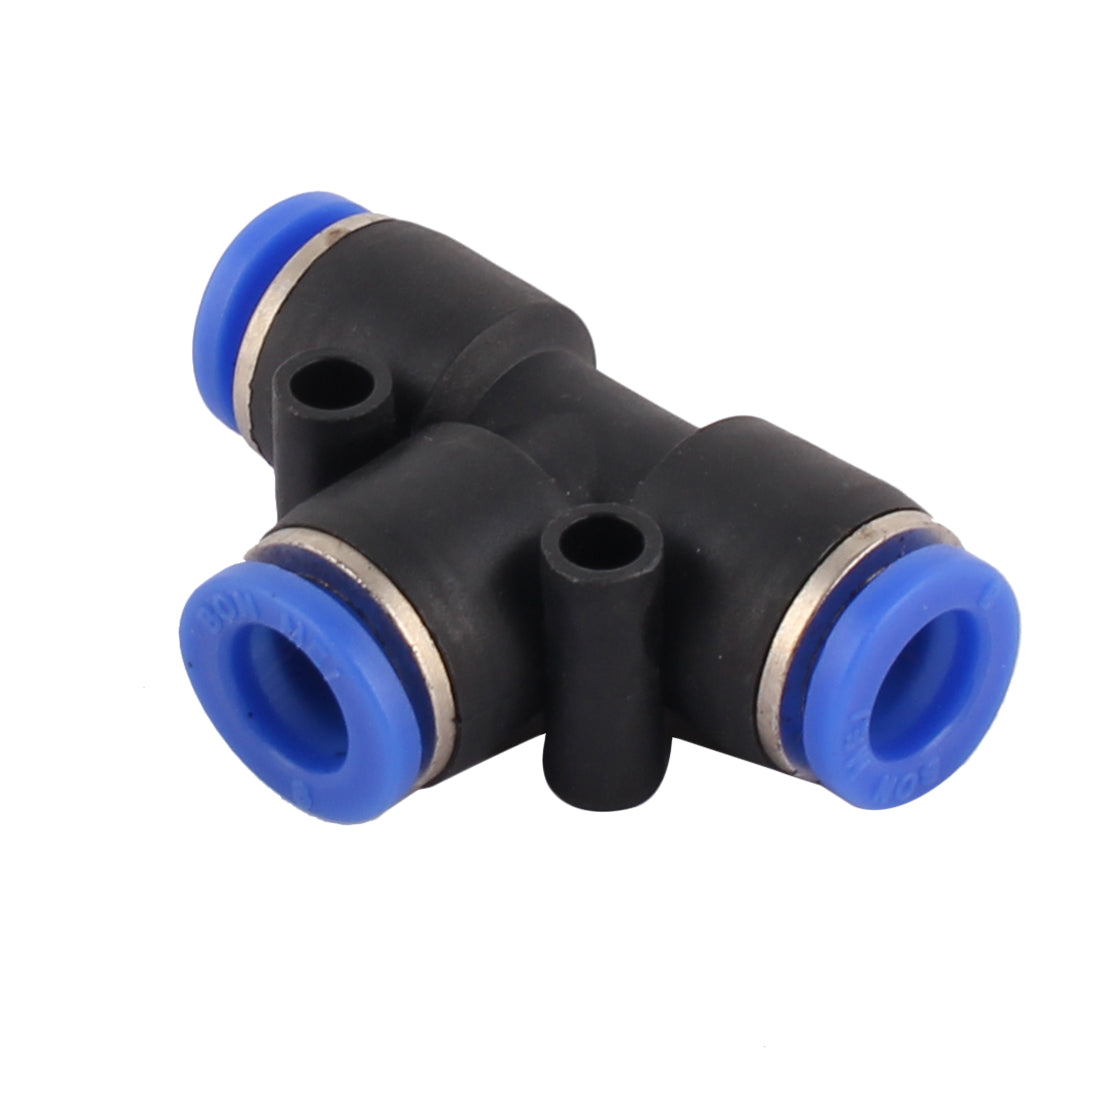 uxcell Uxcell 10mm 1/8BSP Tube OD 3 Way Pneumatic Tee Union Push-in Connector One Touch Air Fitting